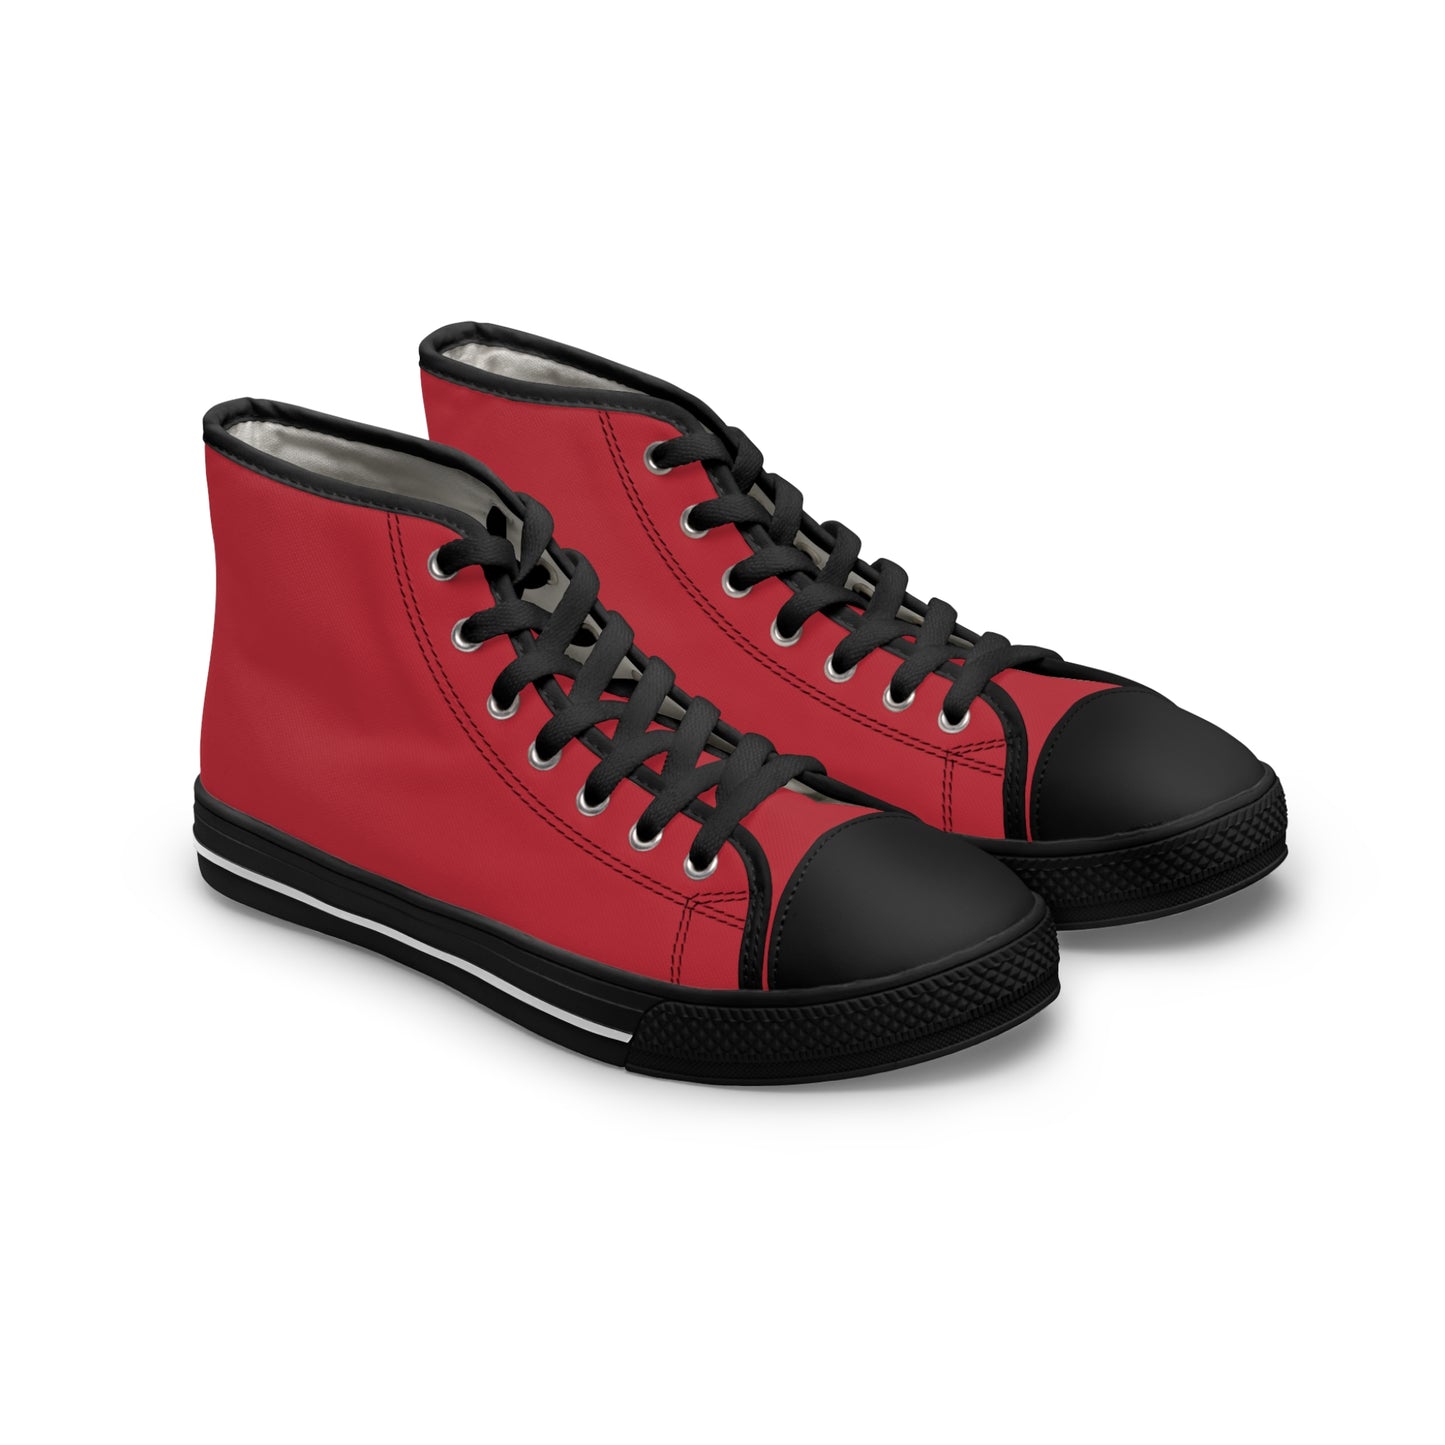 Women's High Top Sneakers - Red US 12 White sole